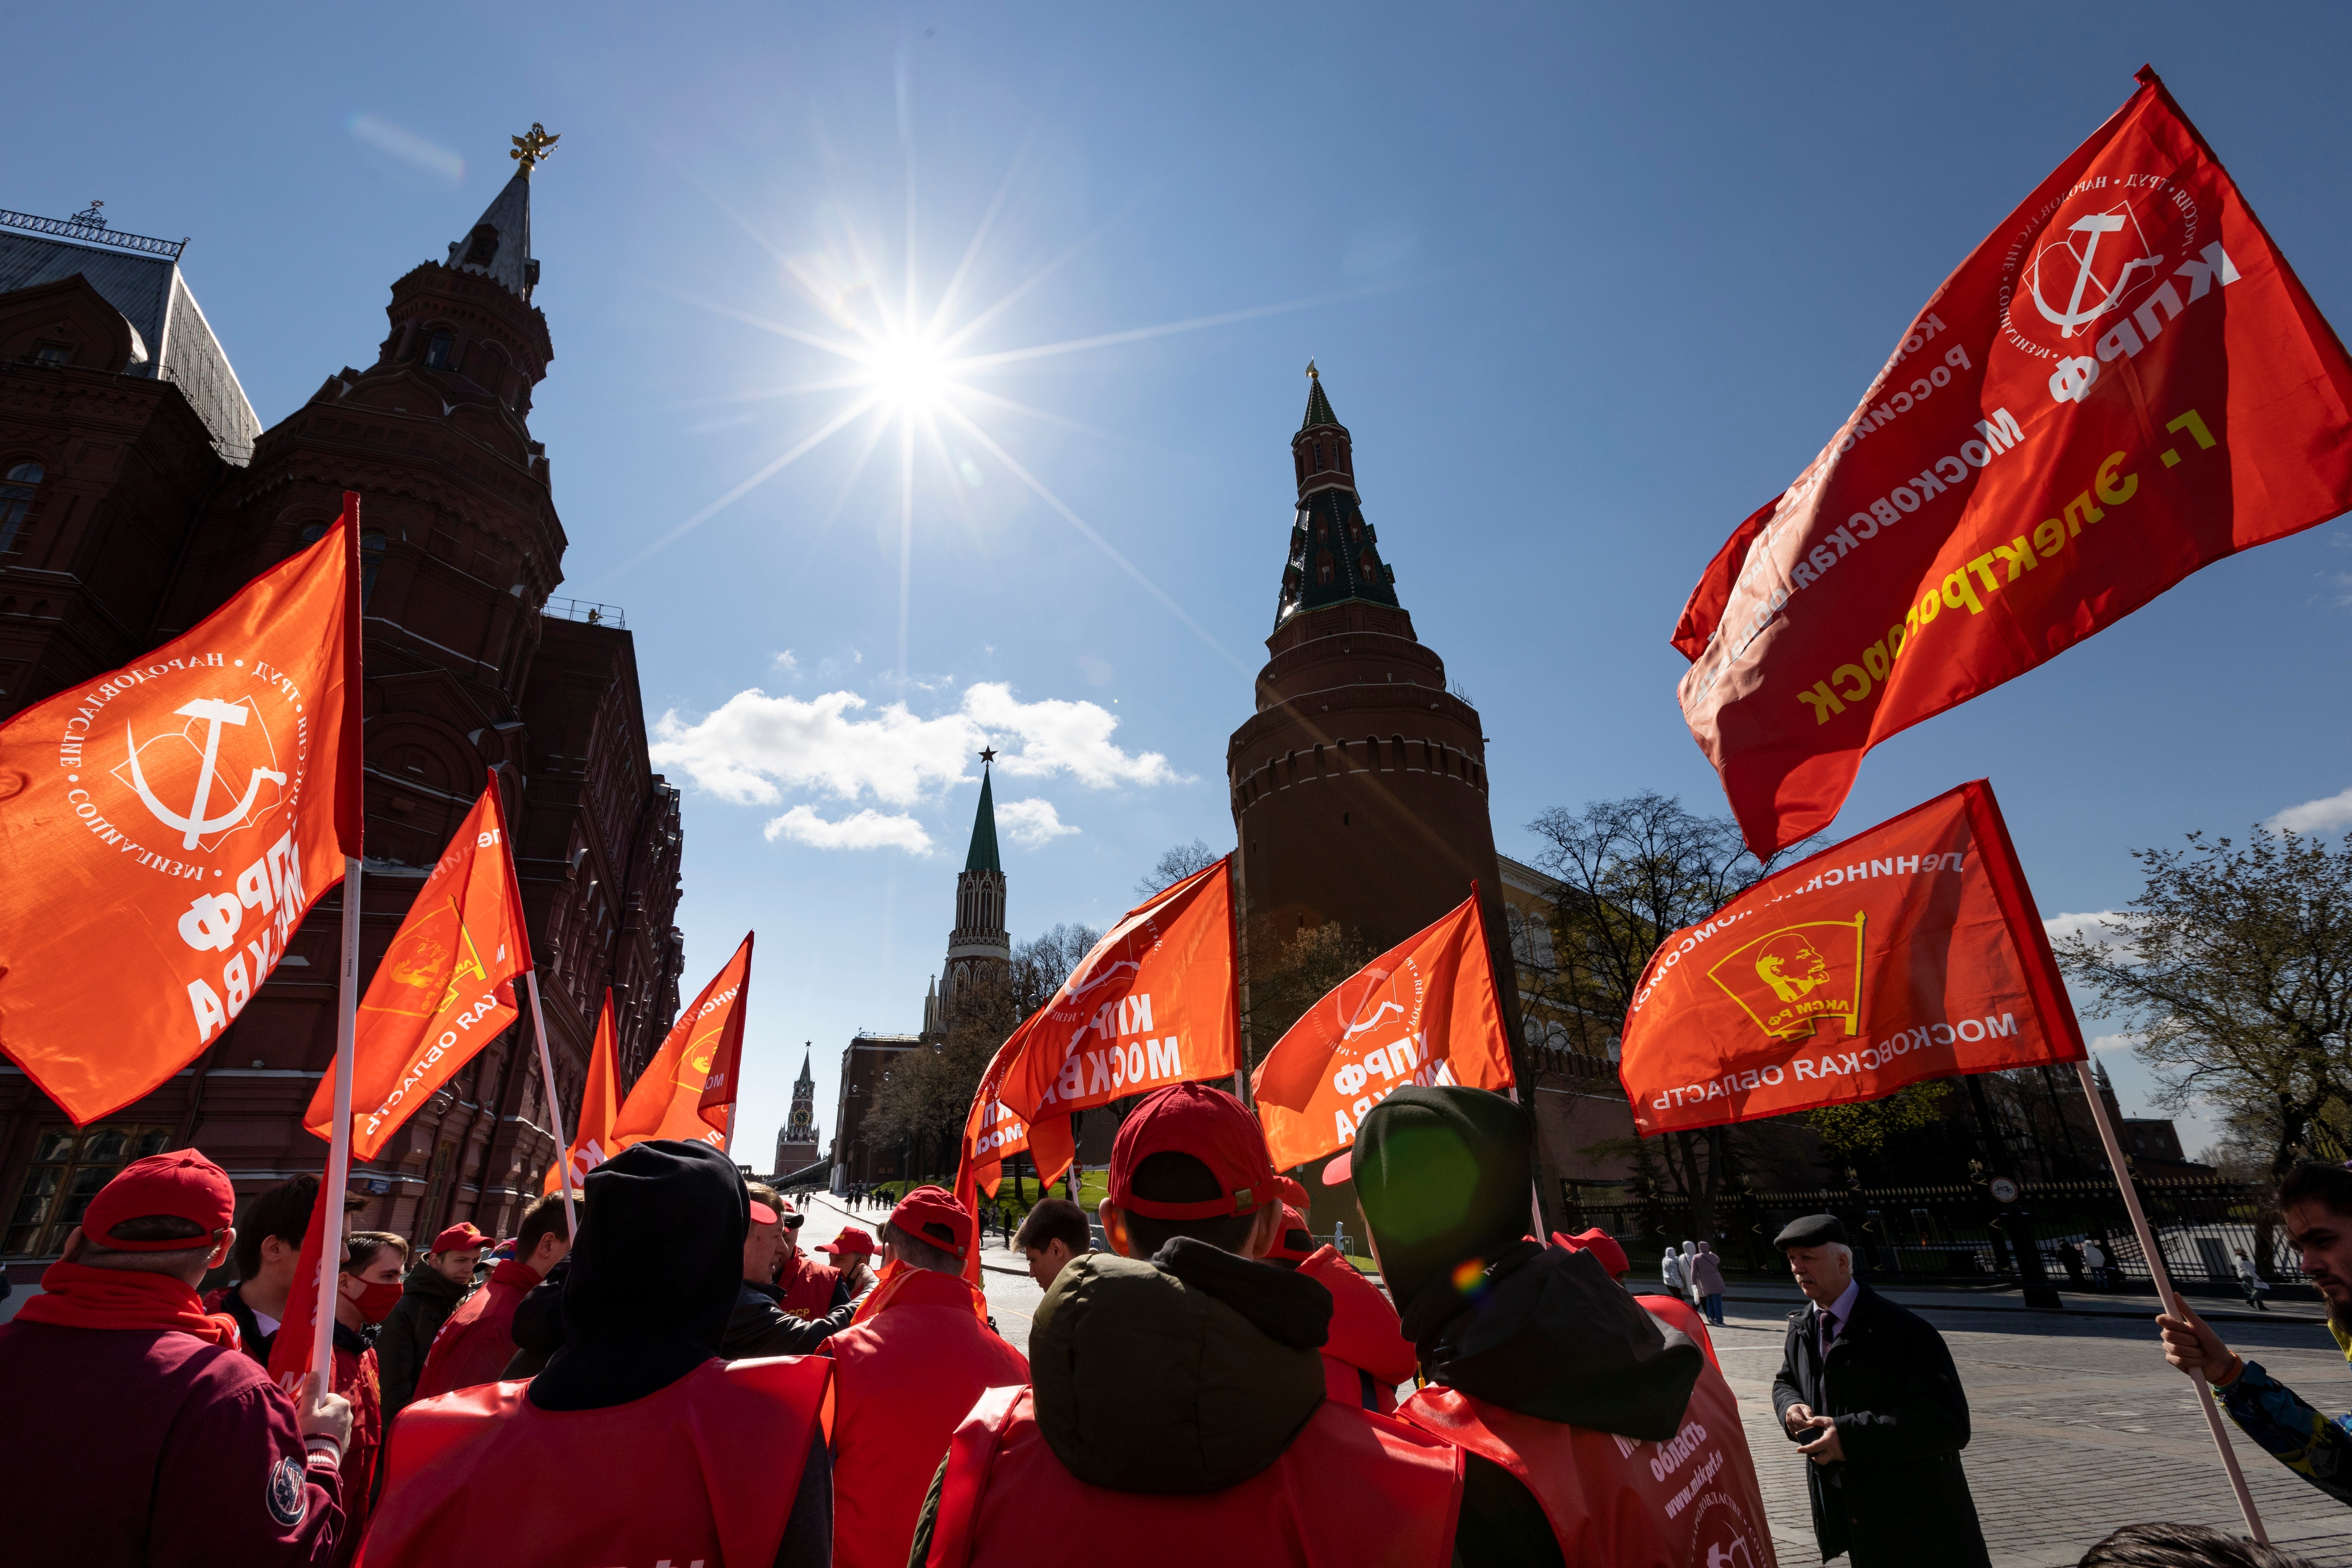 Communist Party supporters gather to mark Labour Day, also knows as May Day, near Red Square in Moscow